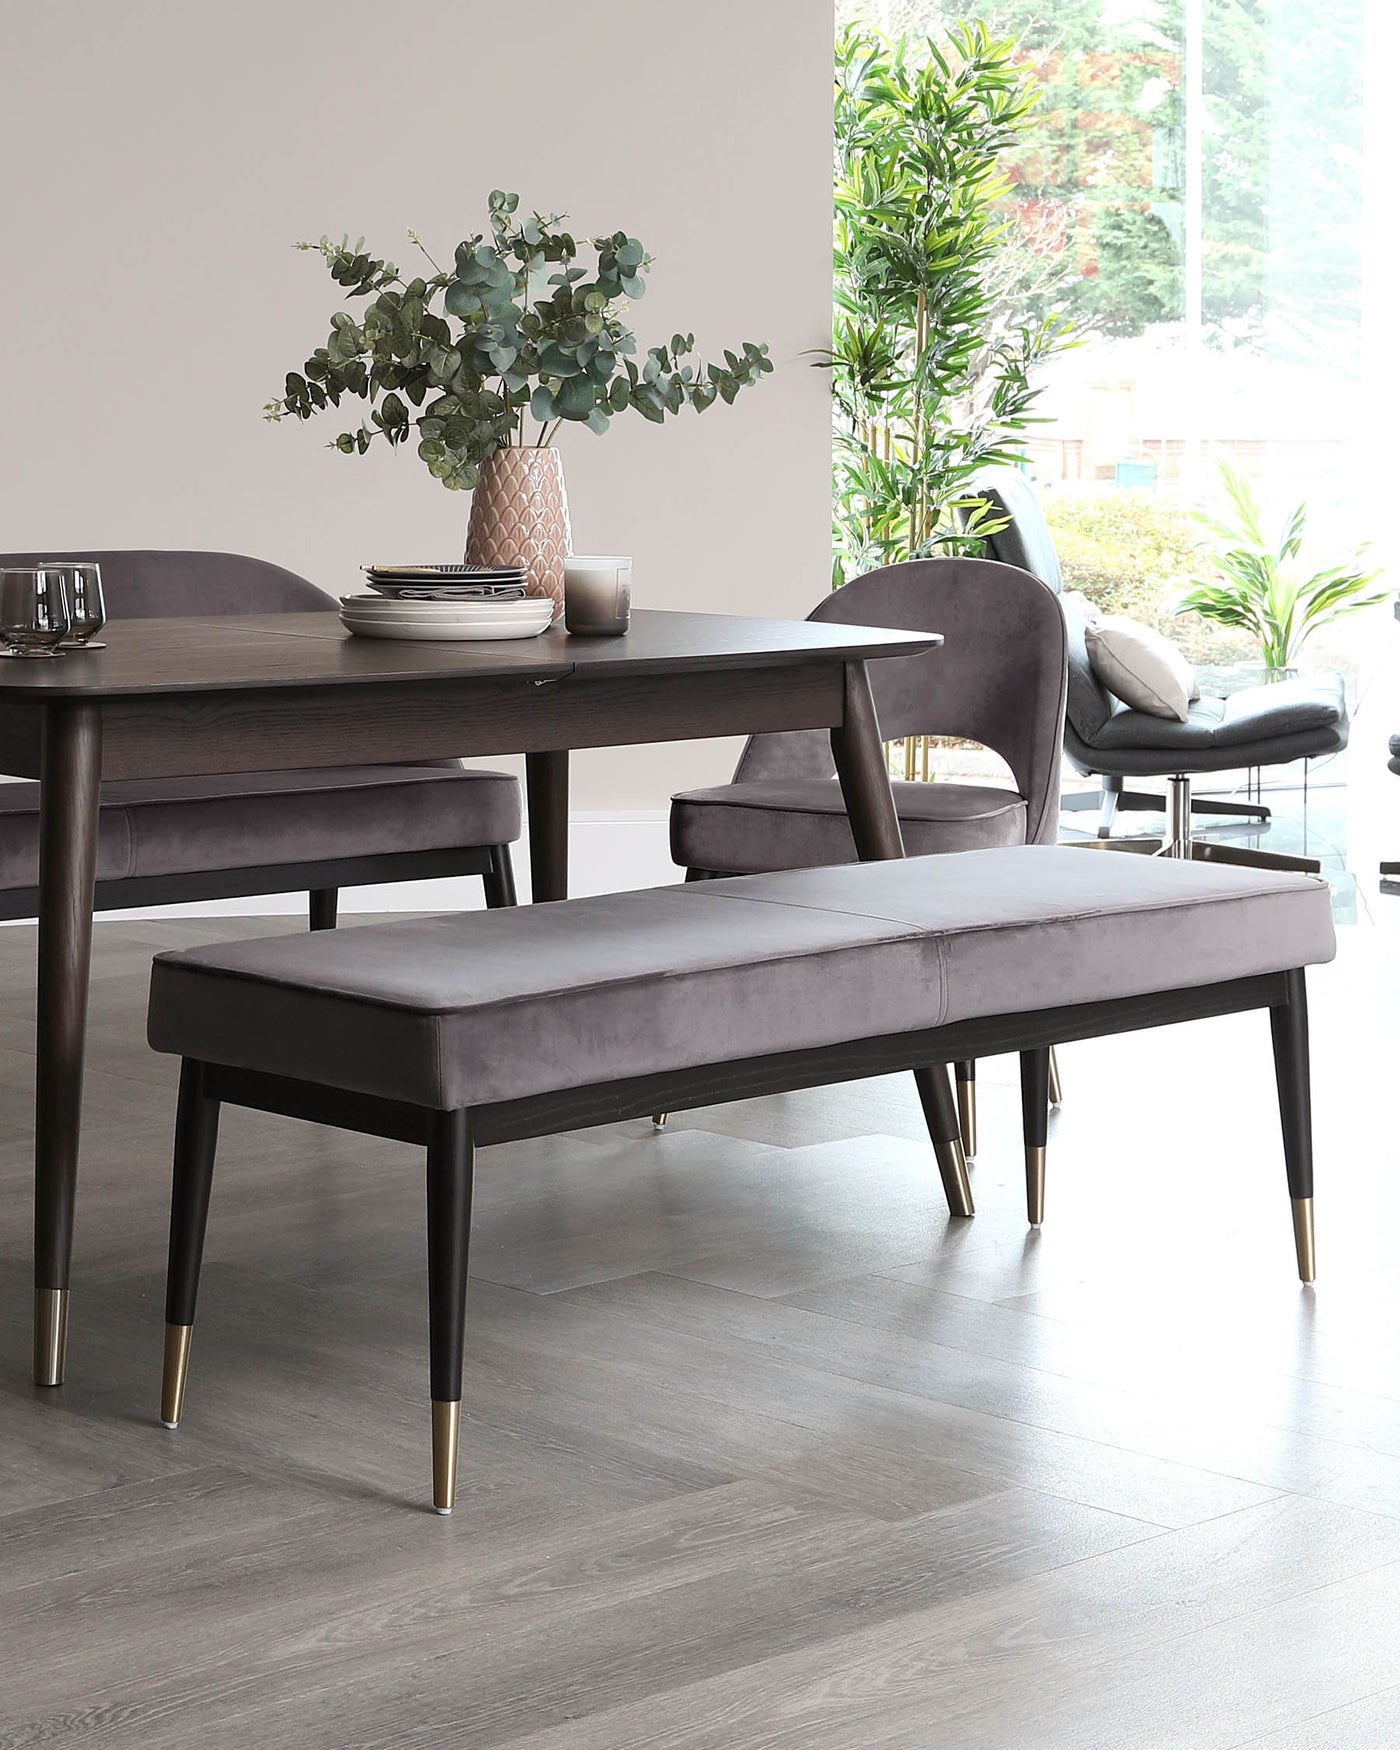 Modern dining room furniture featuring a dark wood table with a matte finish, surrounded by upholstered chairs with curved backs and a matching bench with gold-toned metal capped legs. The setting is complemented by indoor plants and minimalist decor.